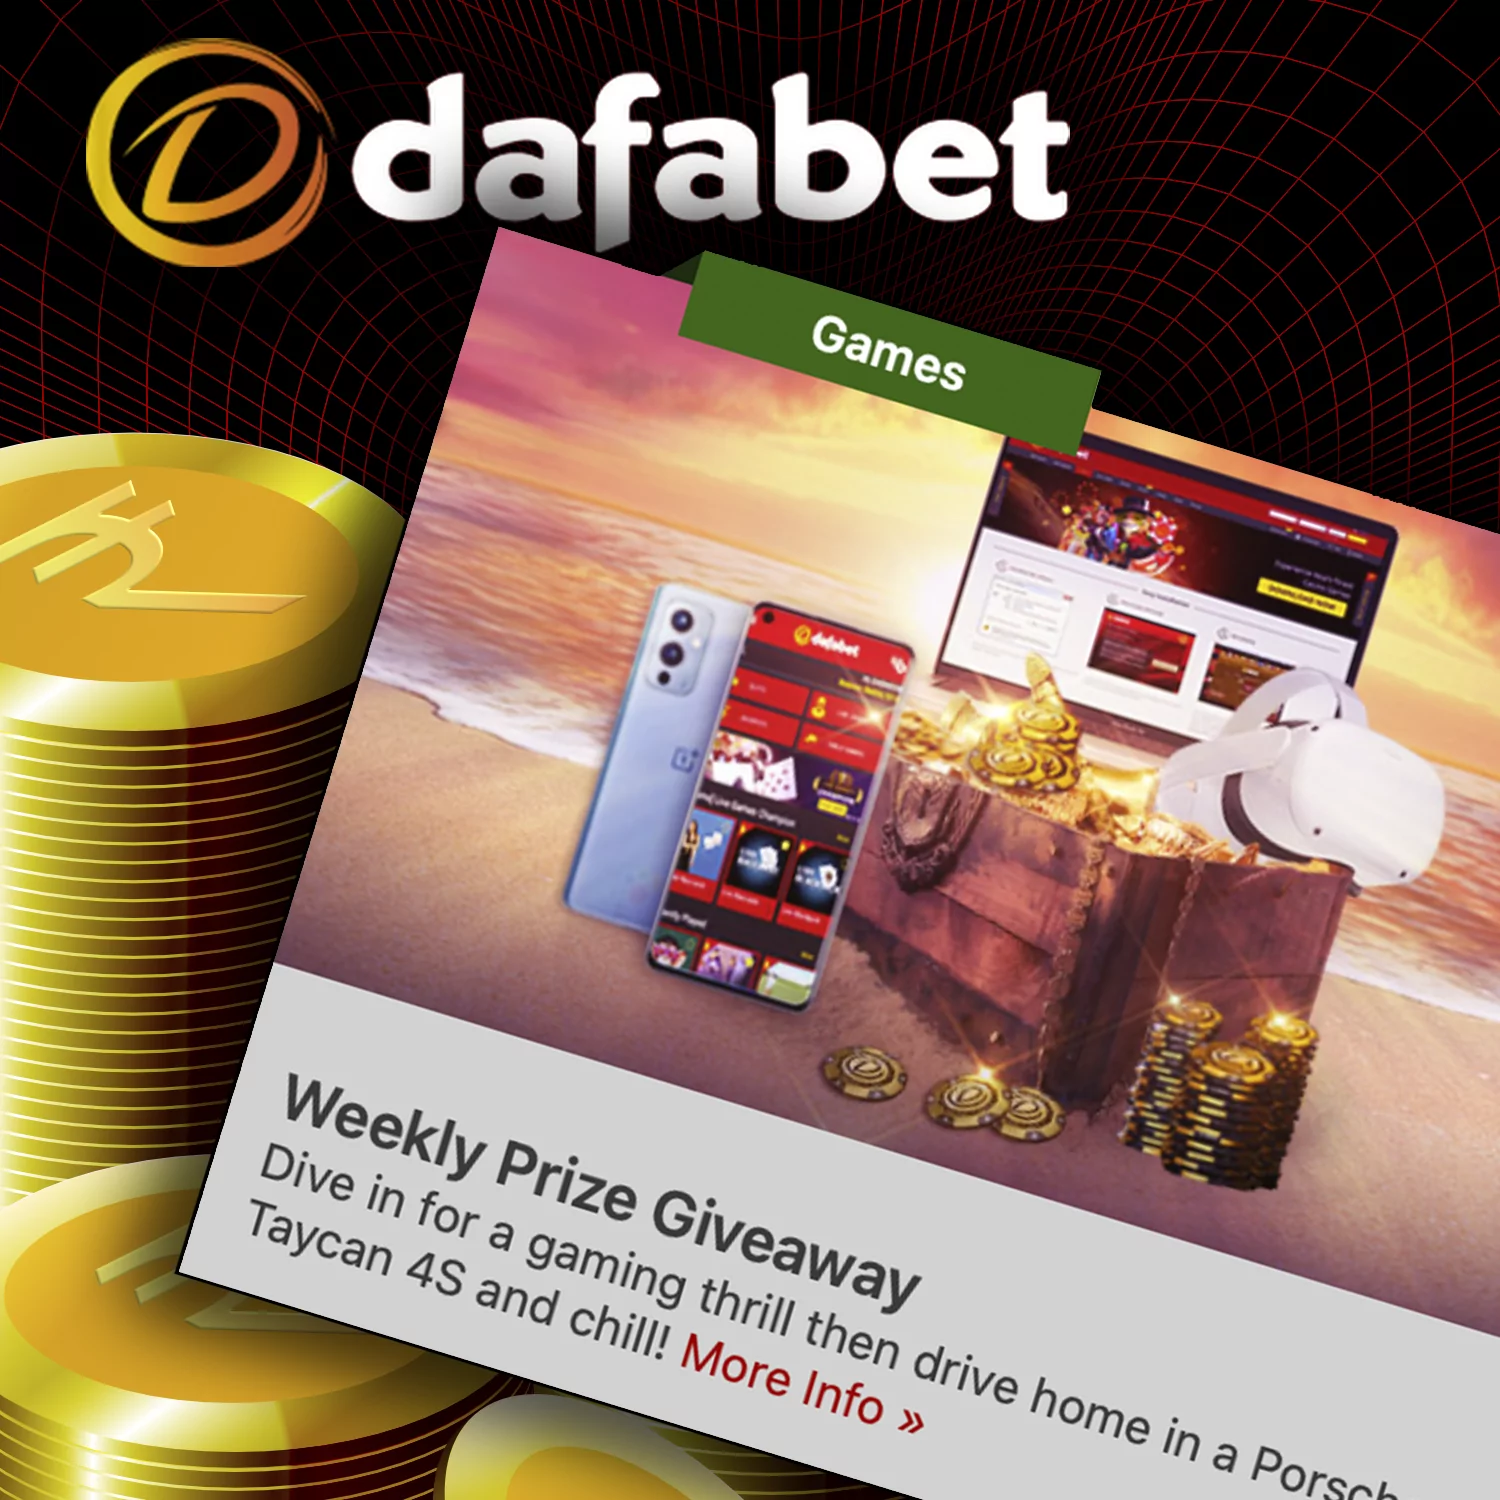 You can earn weekly prizes at Dafabet.